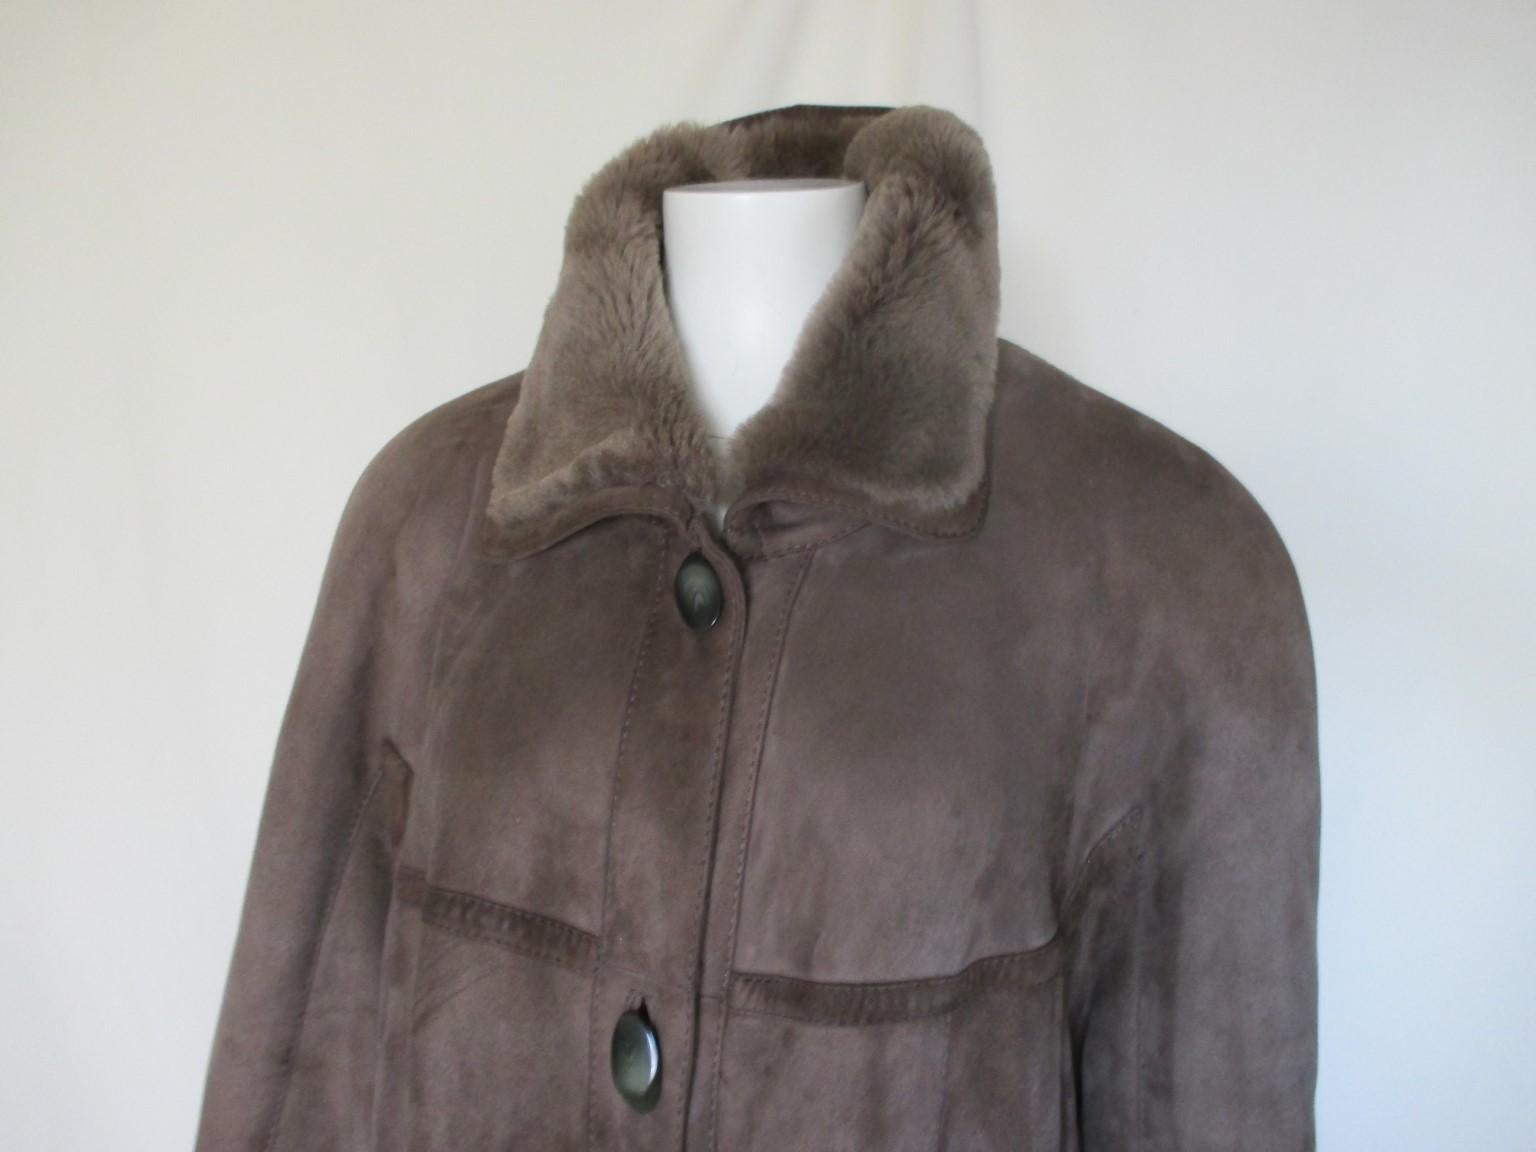 Superb quality suede exterior and lamb interior long vintage coat.

We offer more lambskin, shearling and fur items, see our frontstore

Details:
With 2 pockets and 4 buttons
Sleeves can be roll up and down
Color is Taupe/light brown
From the